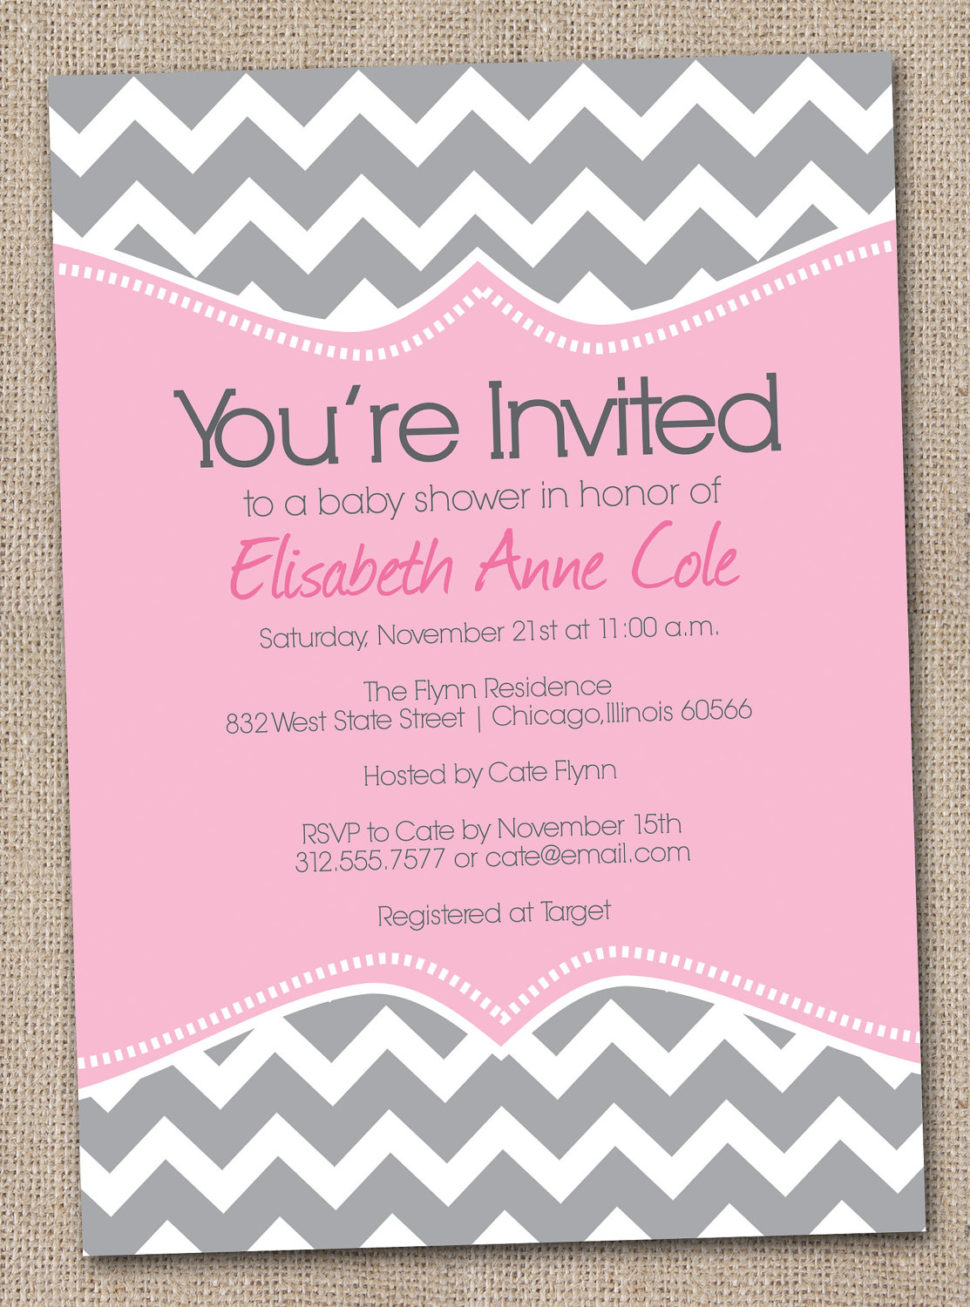 Medium Size of Baby Shower:63+ Delightful Cheap Baby Shower Invitations Image Inspirations Arreglos Para Baby Shower Baby Shower Centerpieces Baby Shower Venues Nyc Baby Shower Stuff